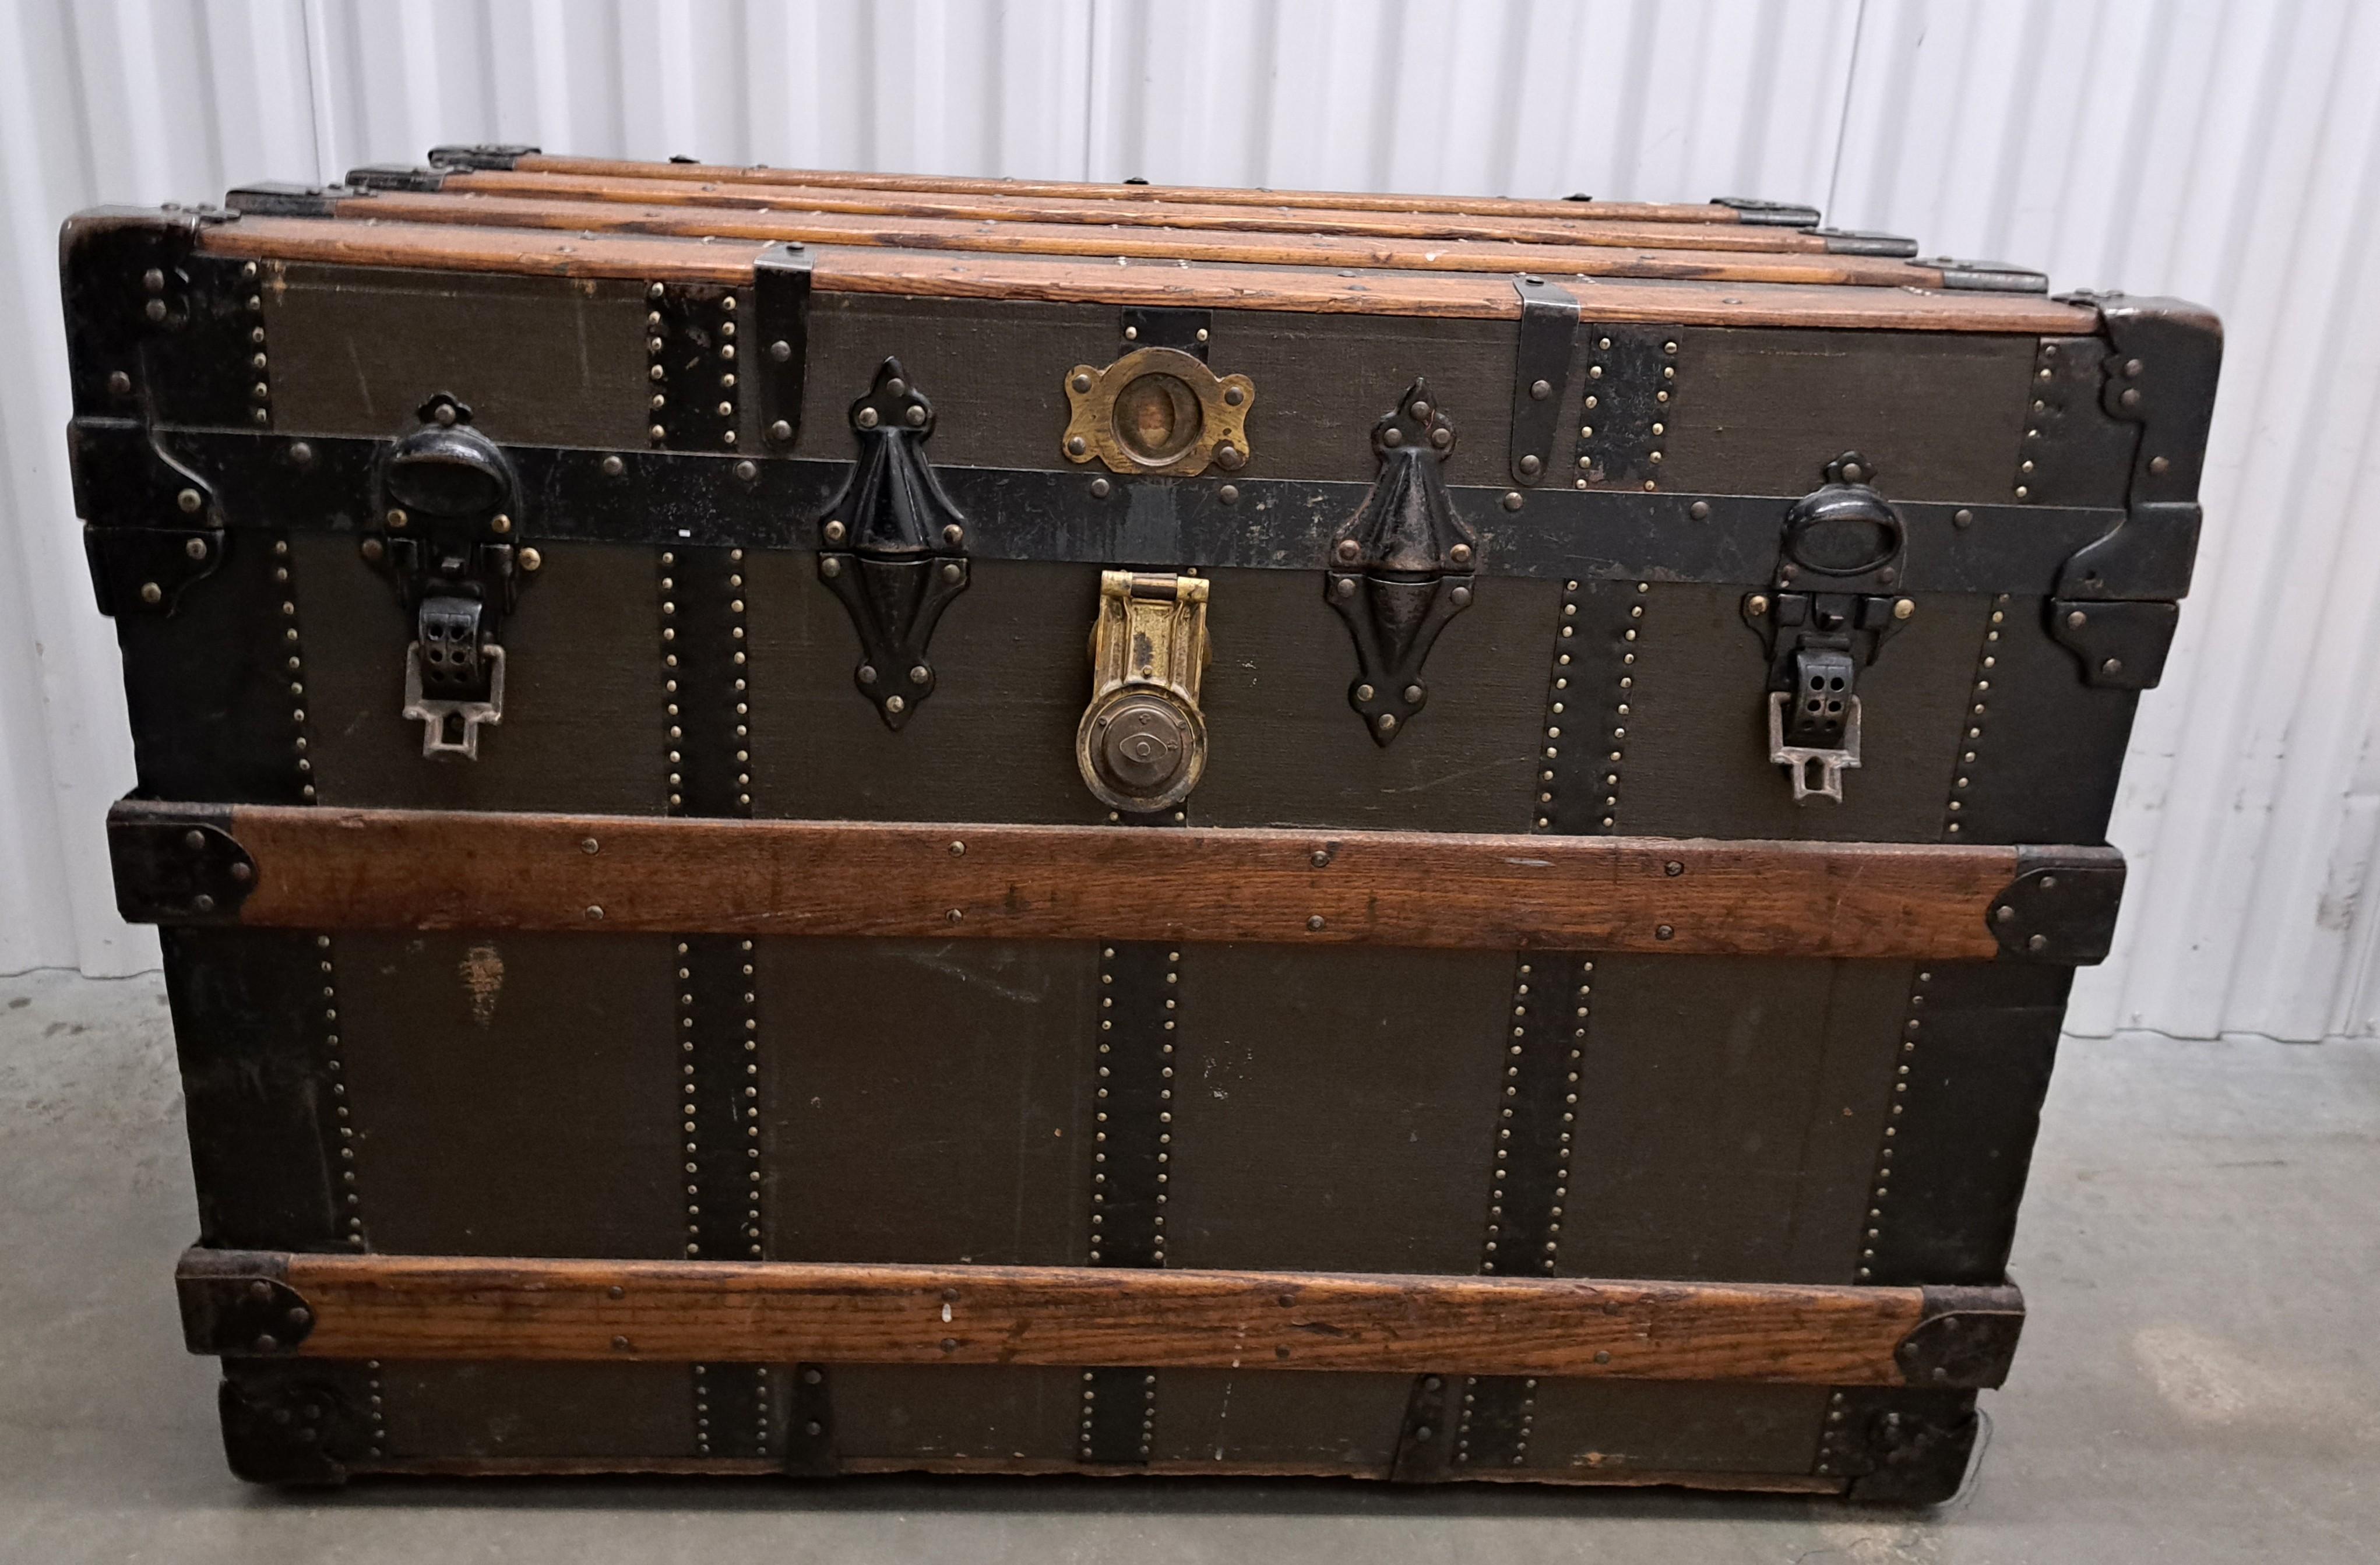 This is a classic American style steamer trunk with wooden slats and brass fittings. Trunk has two custom compartment trays that are in good condition. With brass label stating Henry Likly and Co. Rochester New York.